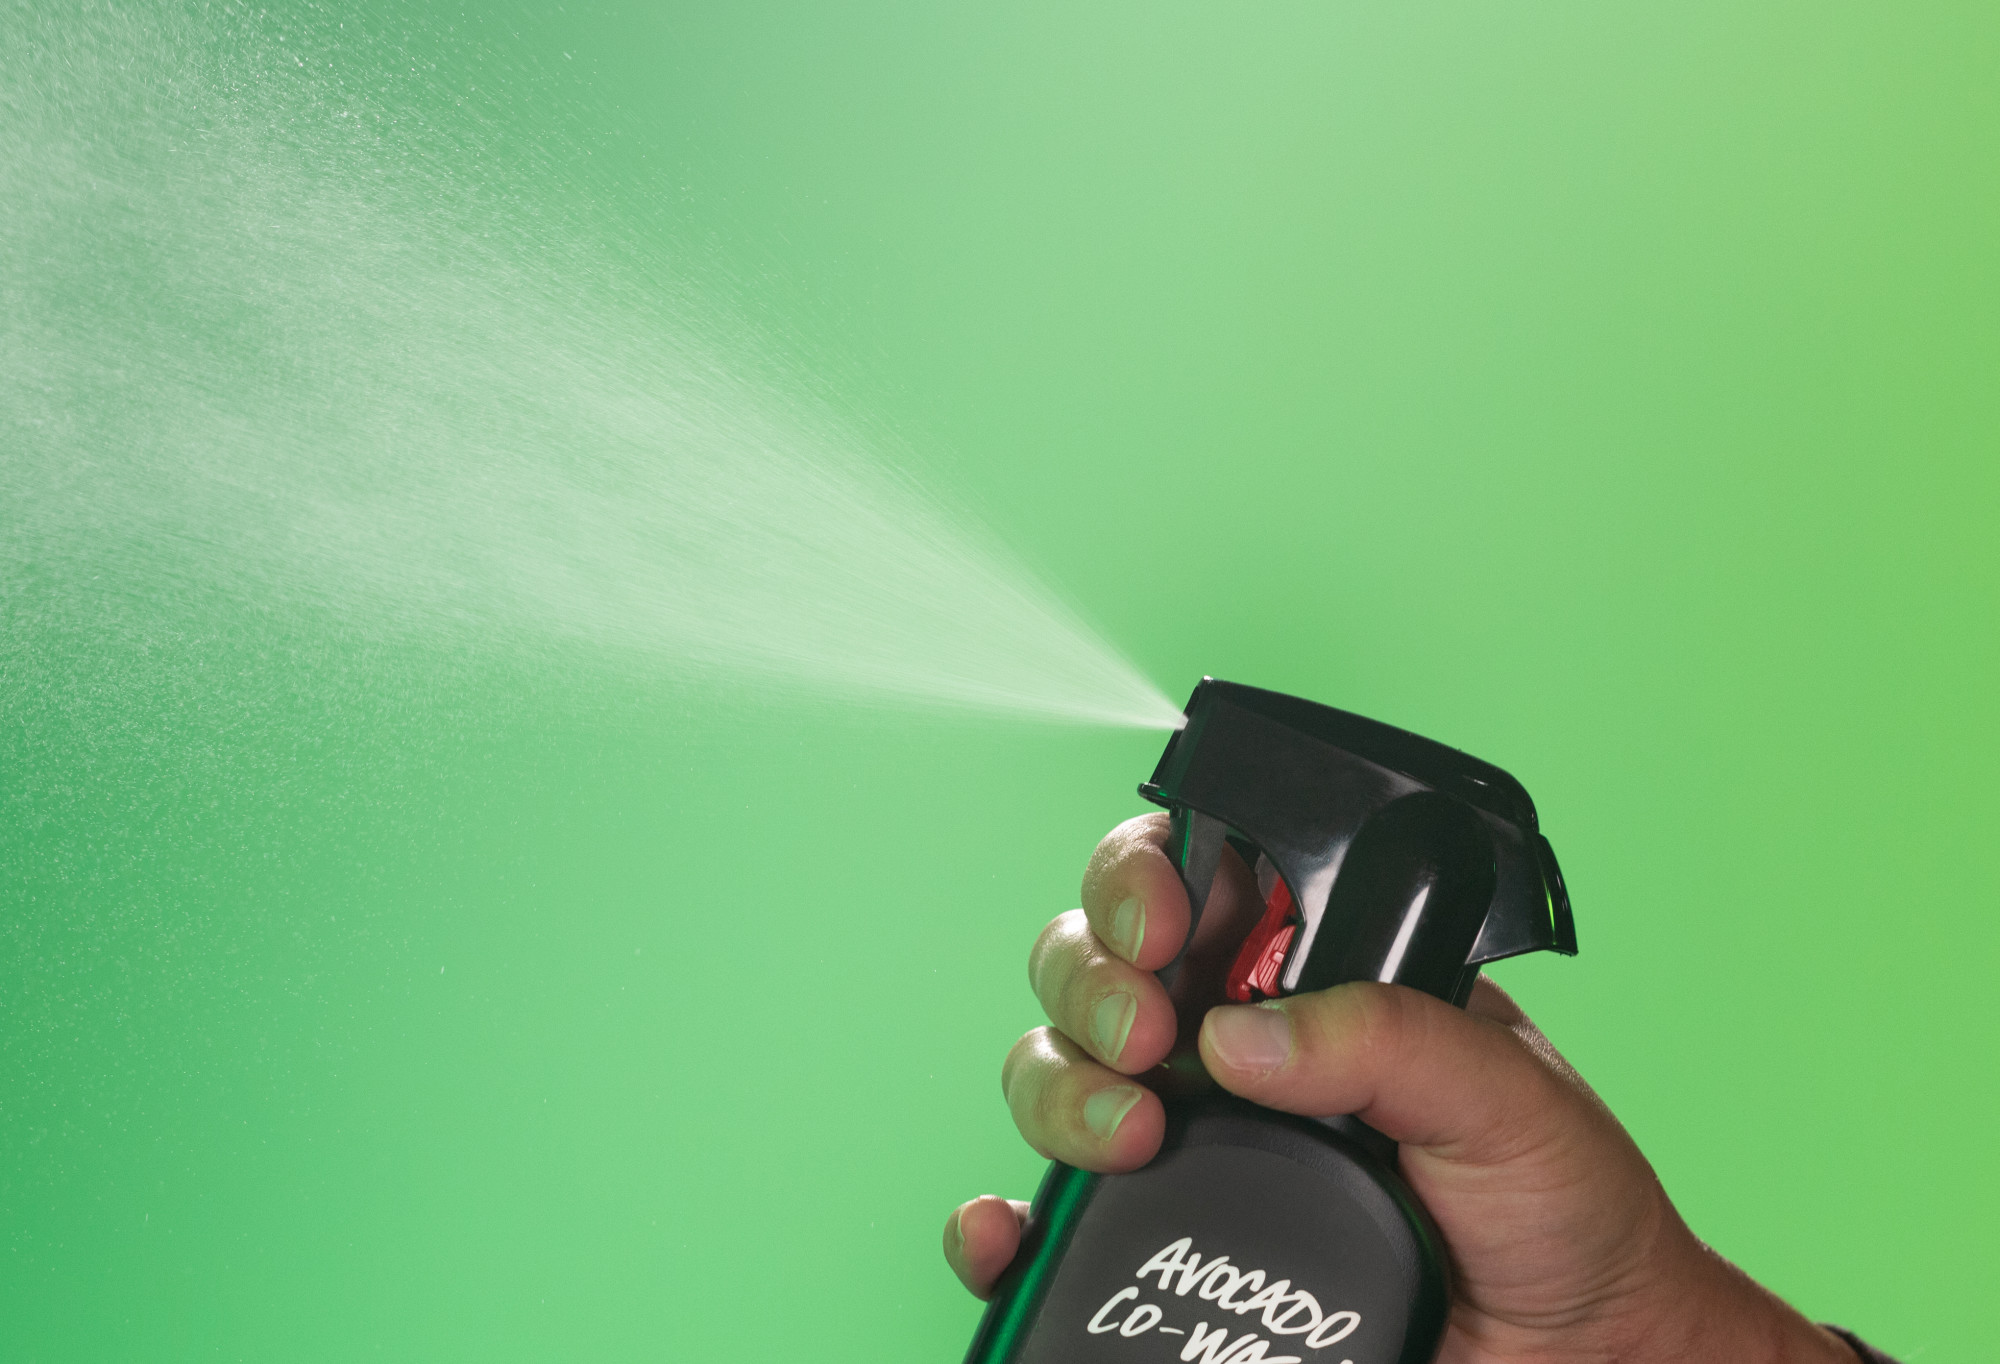 Avocado Co-Wash body spray is sprayed up into the air, in front of a vibrant light green background.